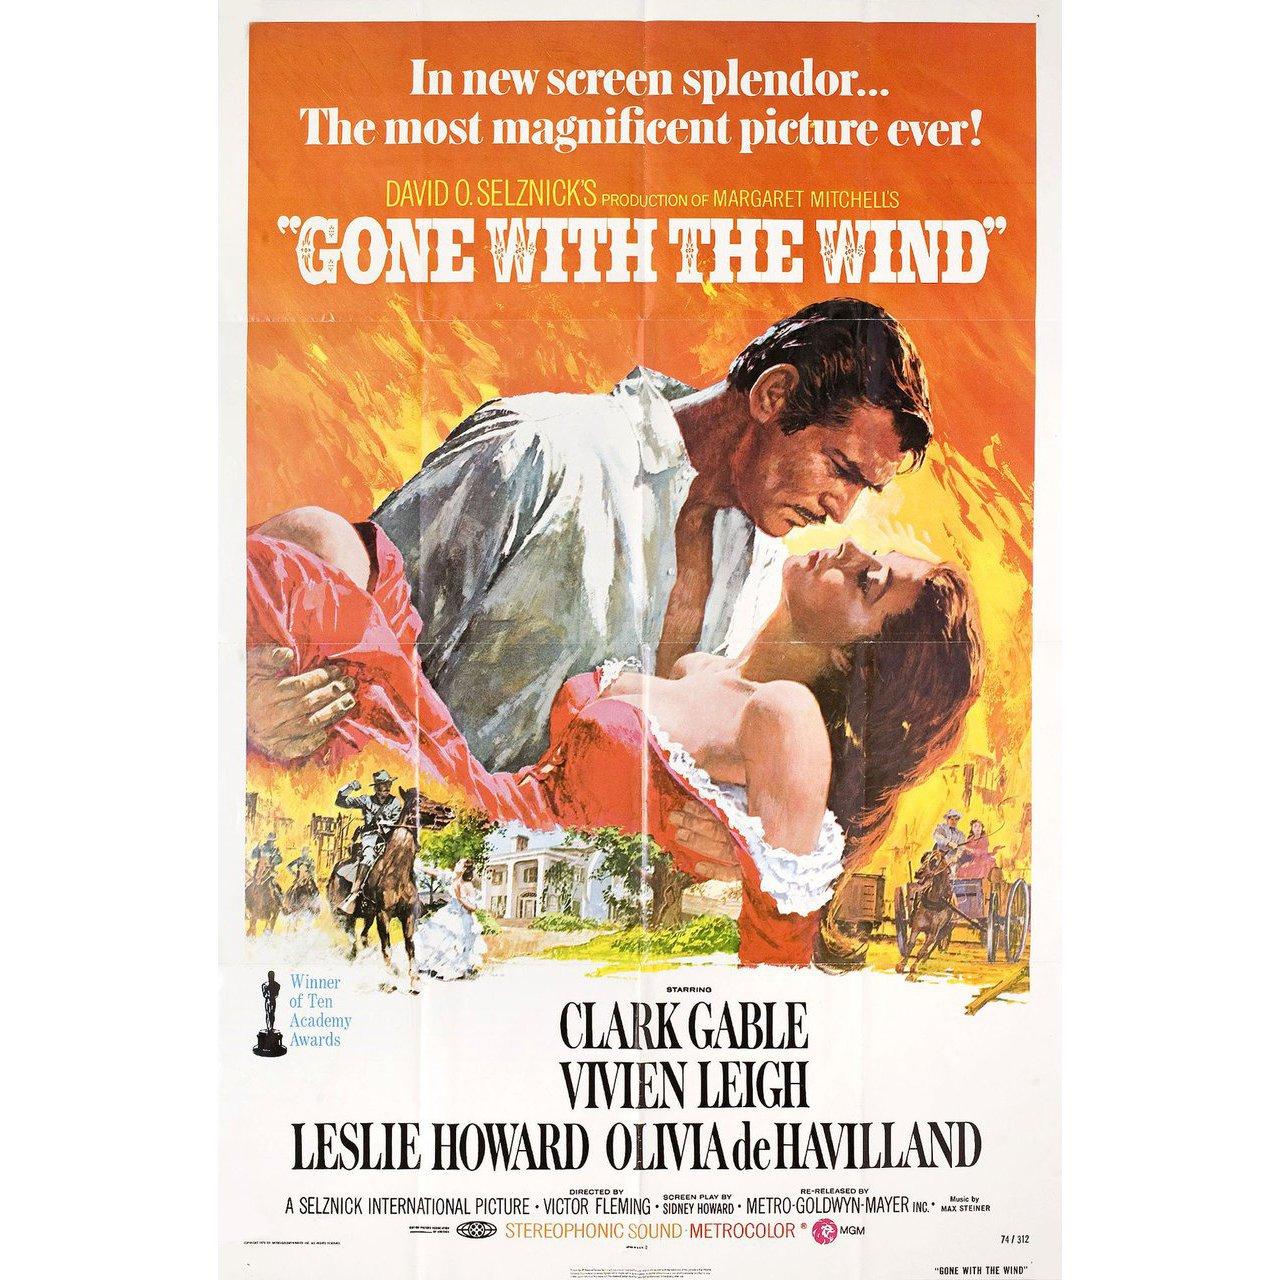 American Gone with the Wind R1974 U.S. One Sheet Film Poster